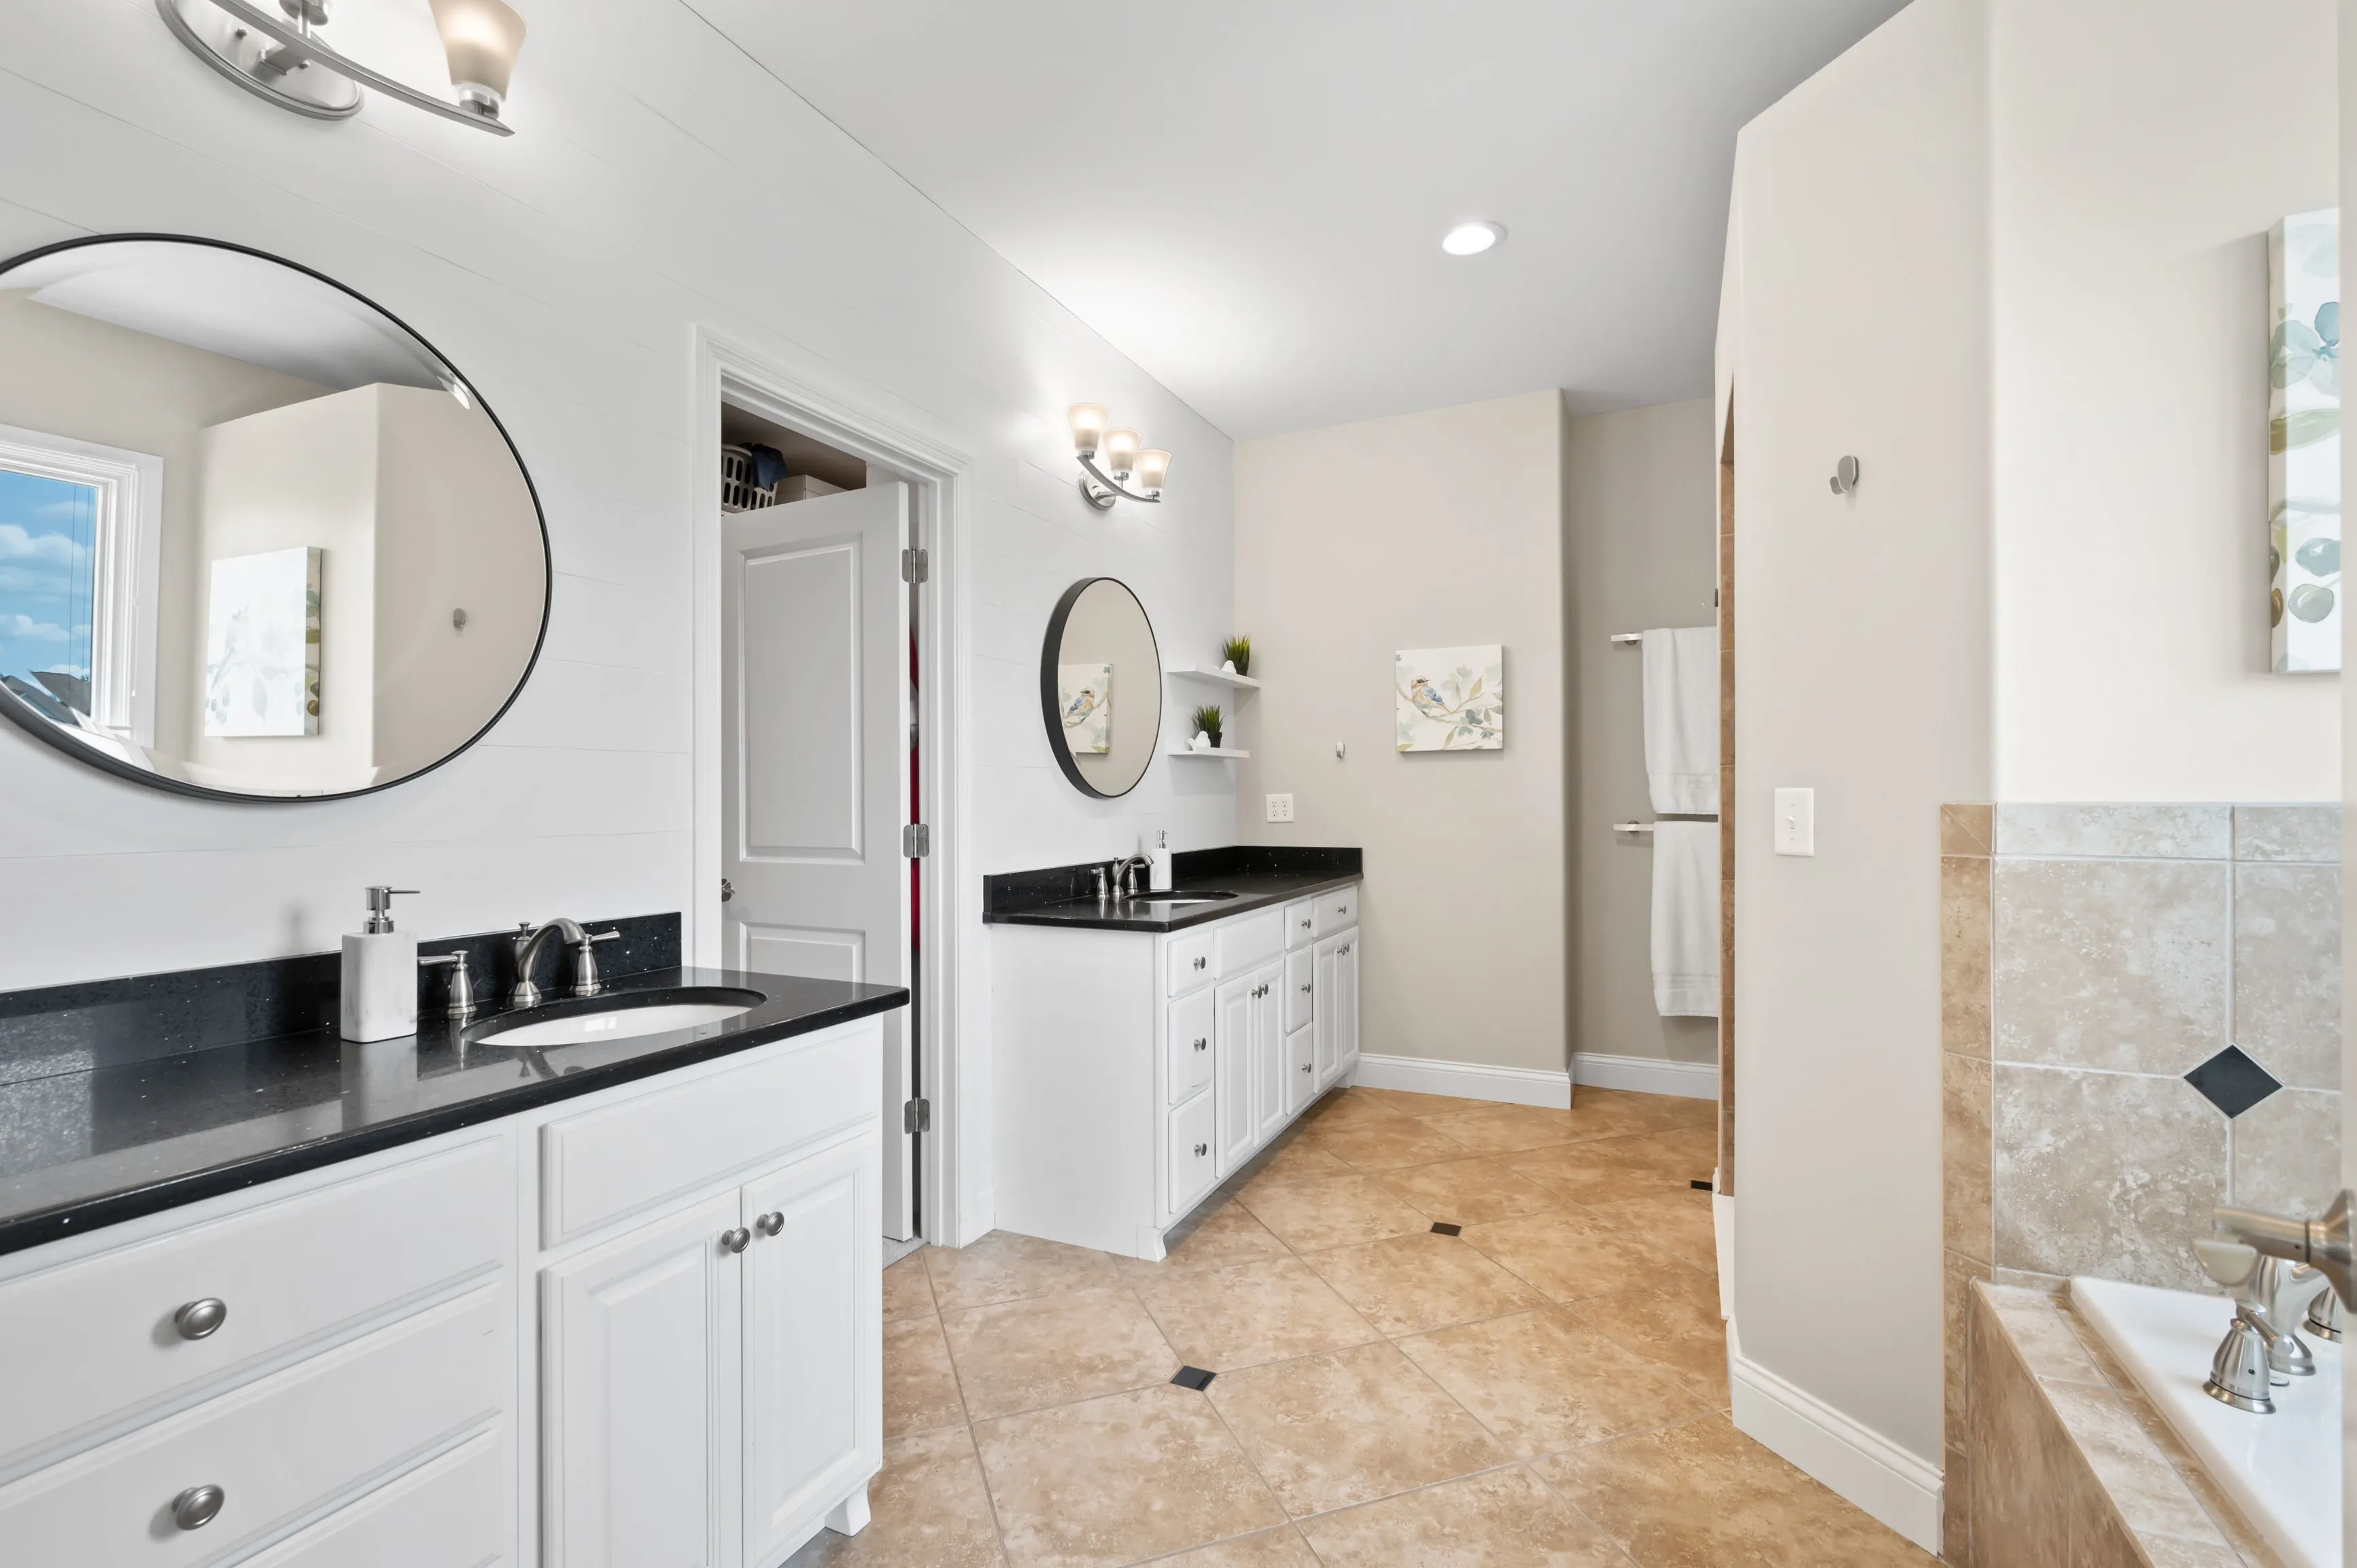 A modern bathroom with dual vanity sinks, large mirrors, and a separate shower and bathtub area.